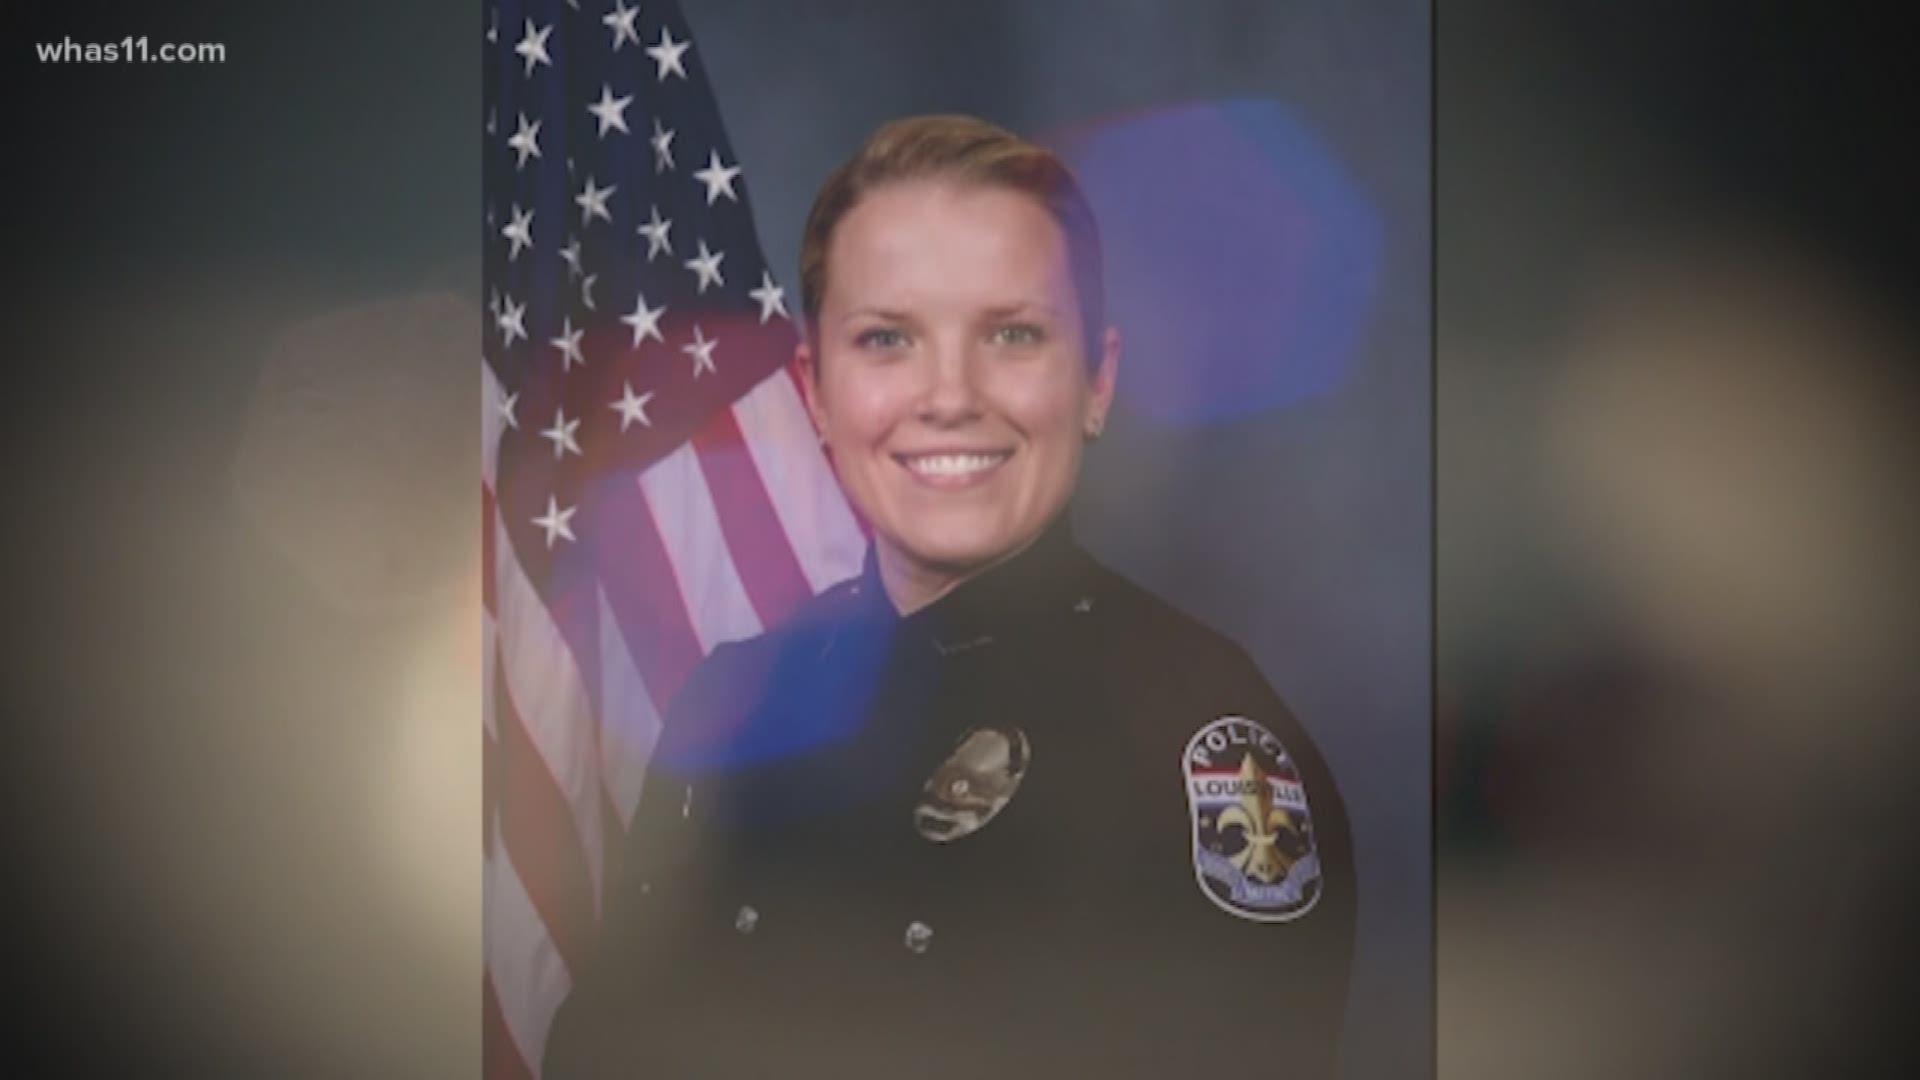 A difficult day to celebrate for the family of an LMPD officer killed in the line of duty on Christmas Eve.